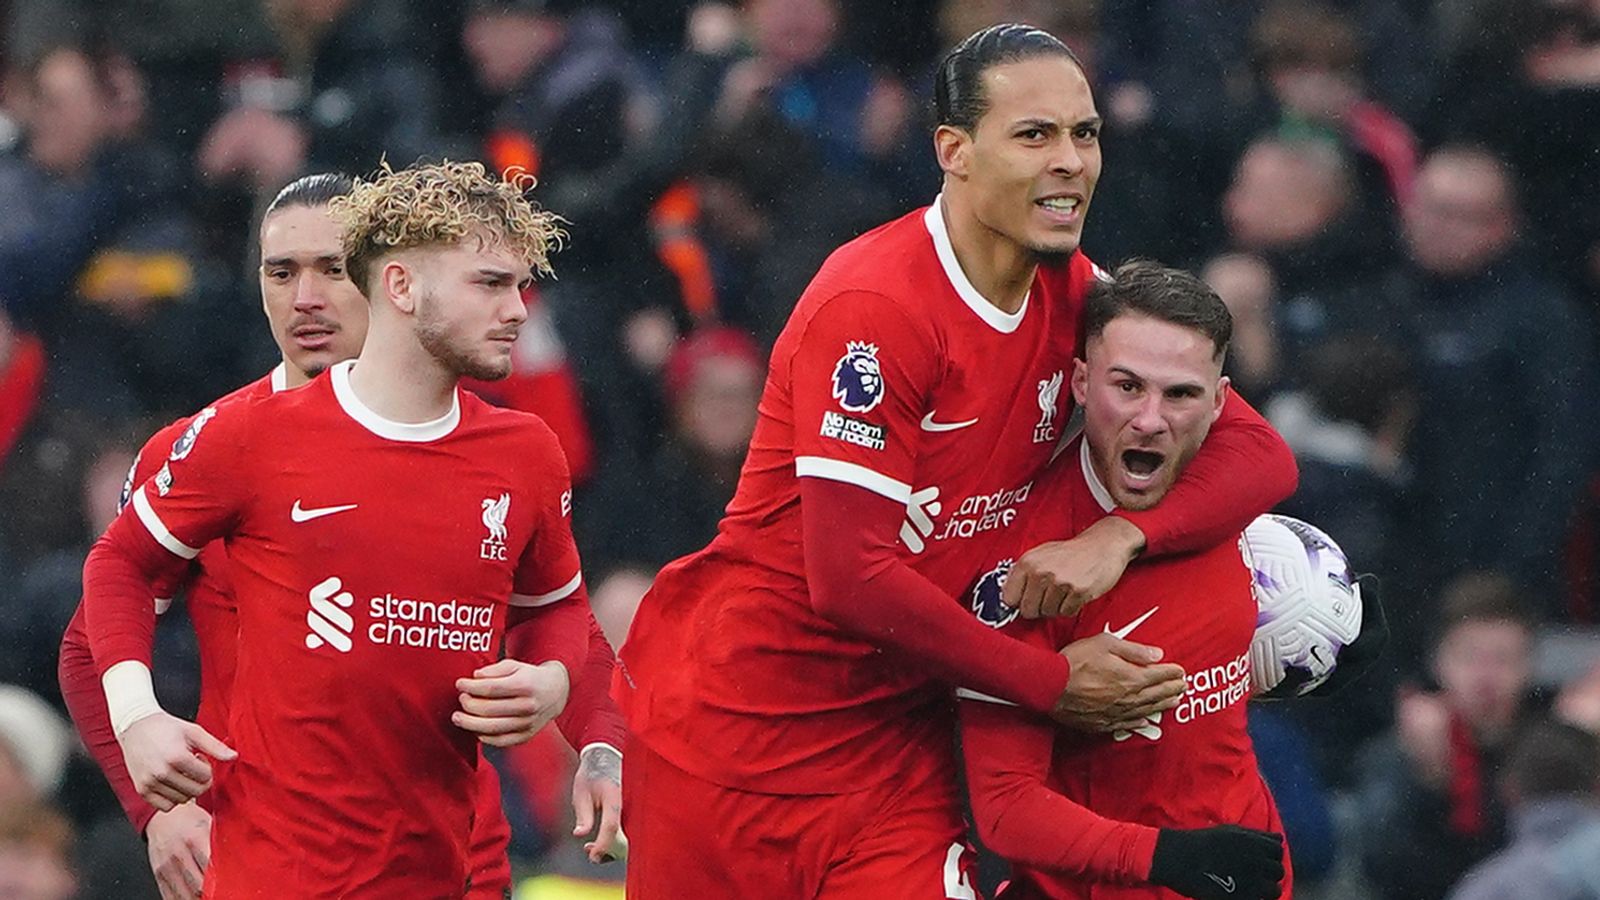 The EPL title race thickens as Liverpool return to the summit with eight games left